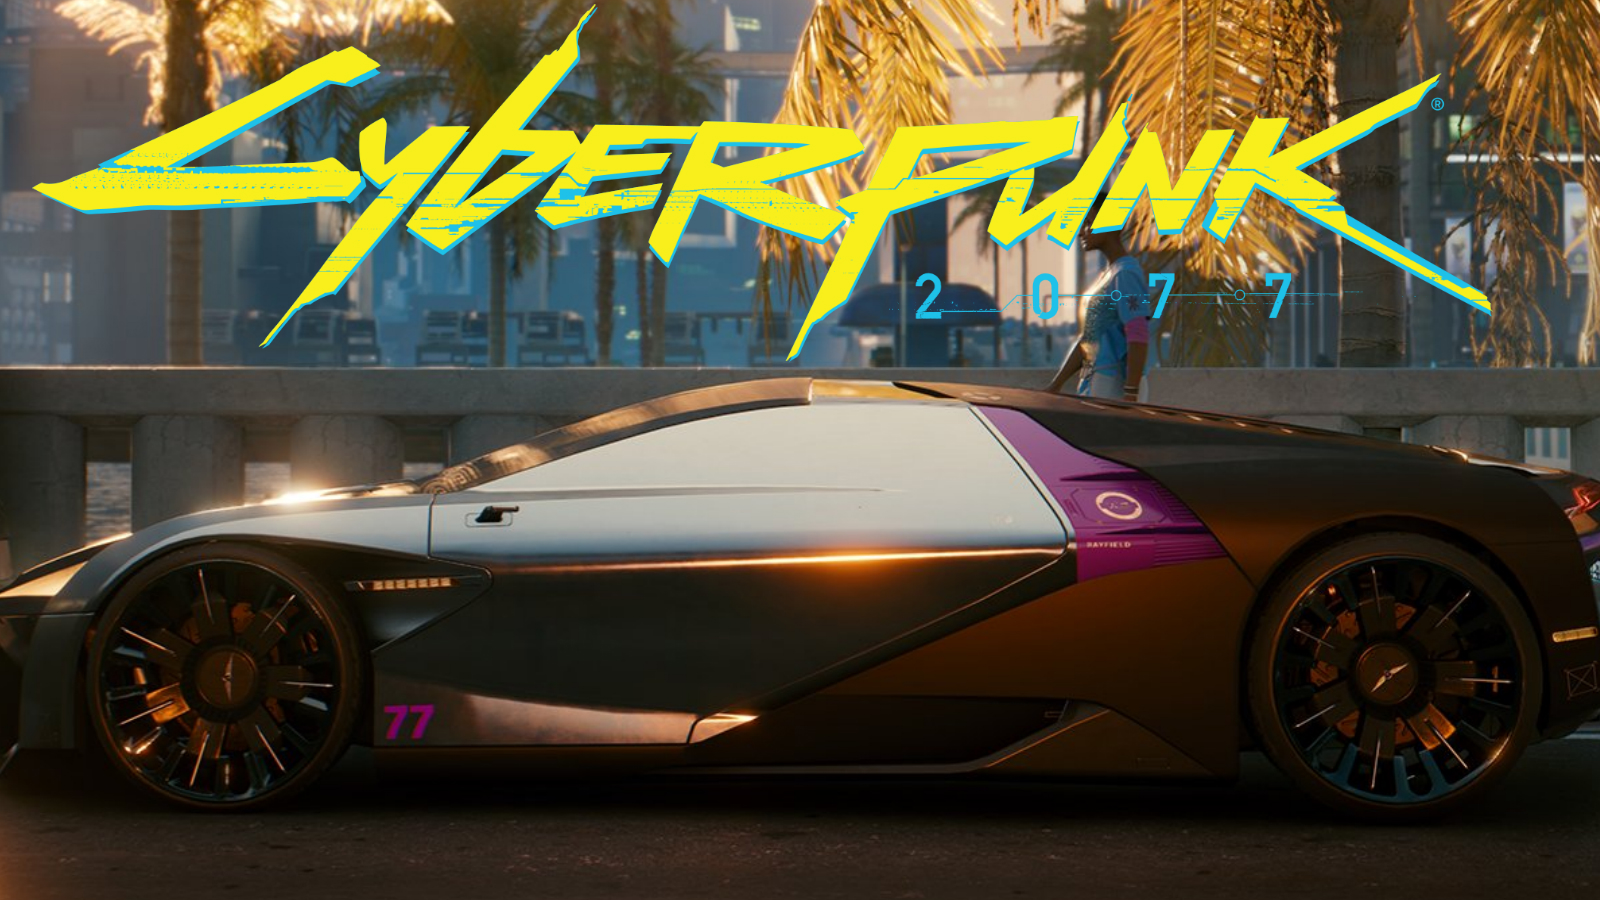 How To Get The Fastest Car For Free In Cyberpunk 2077 Rayfield